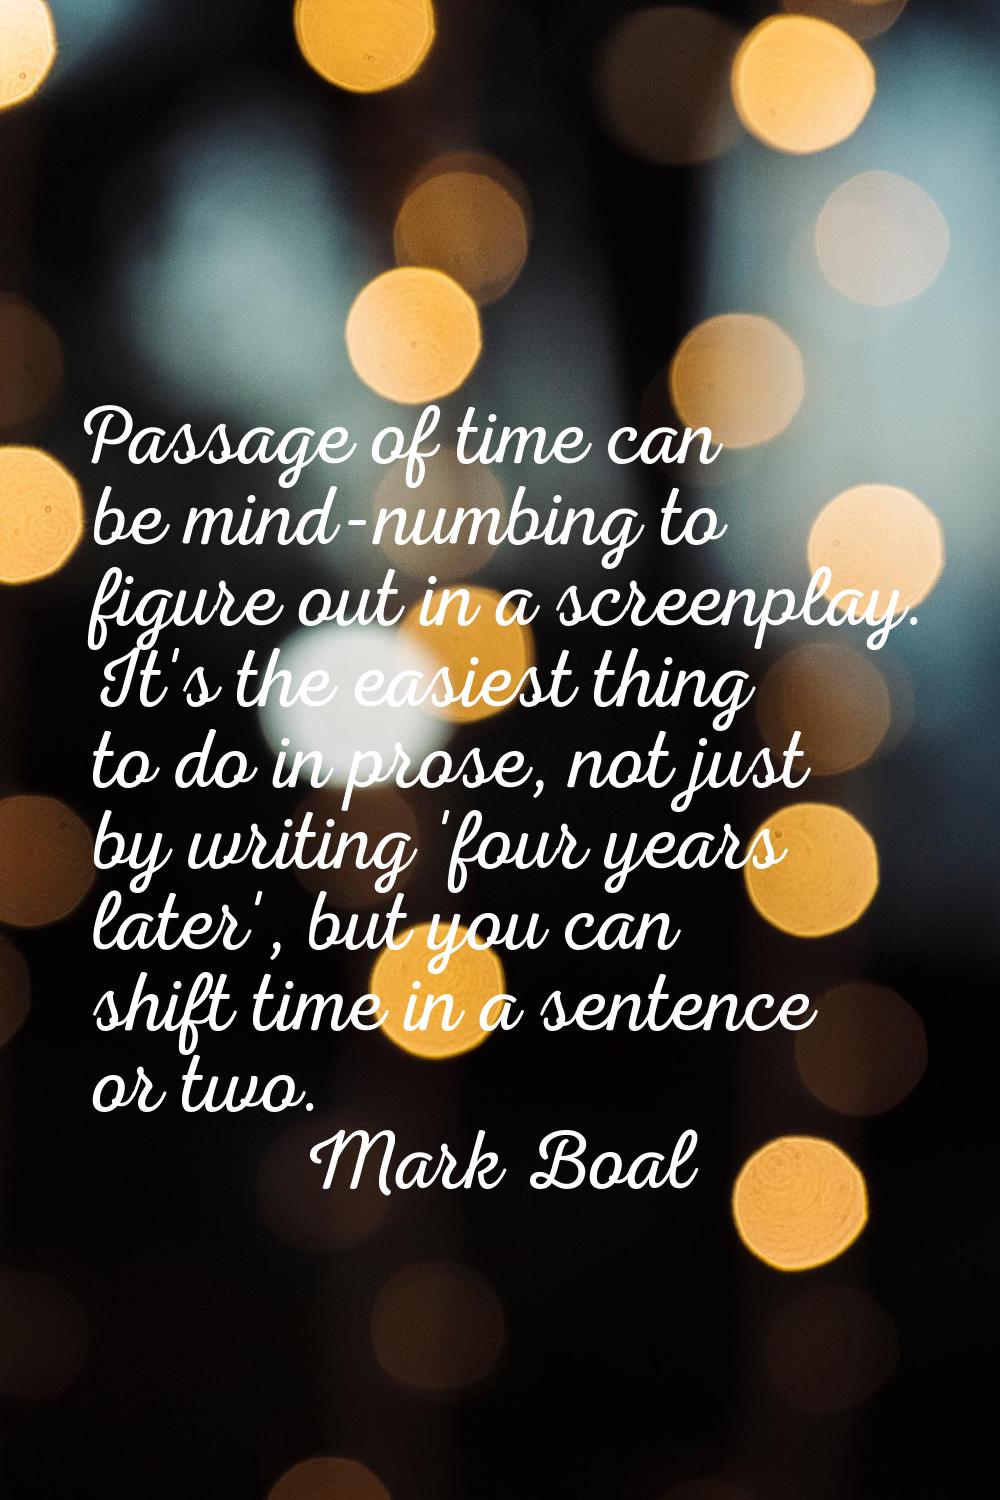 Passage of time can be mind-numbing to figure out in a screenplay. It's the easiest thing to do in 